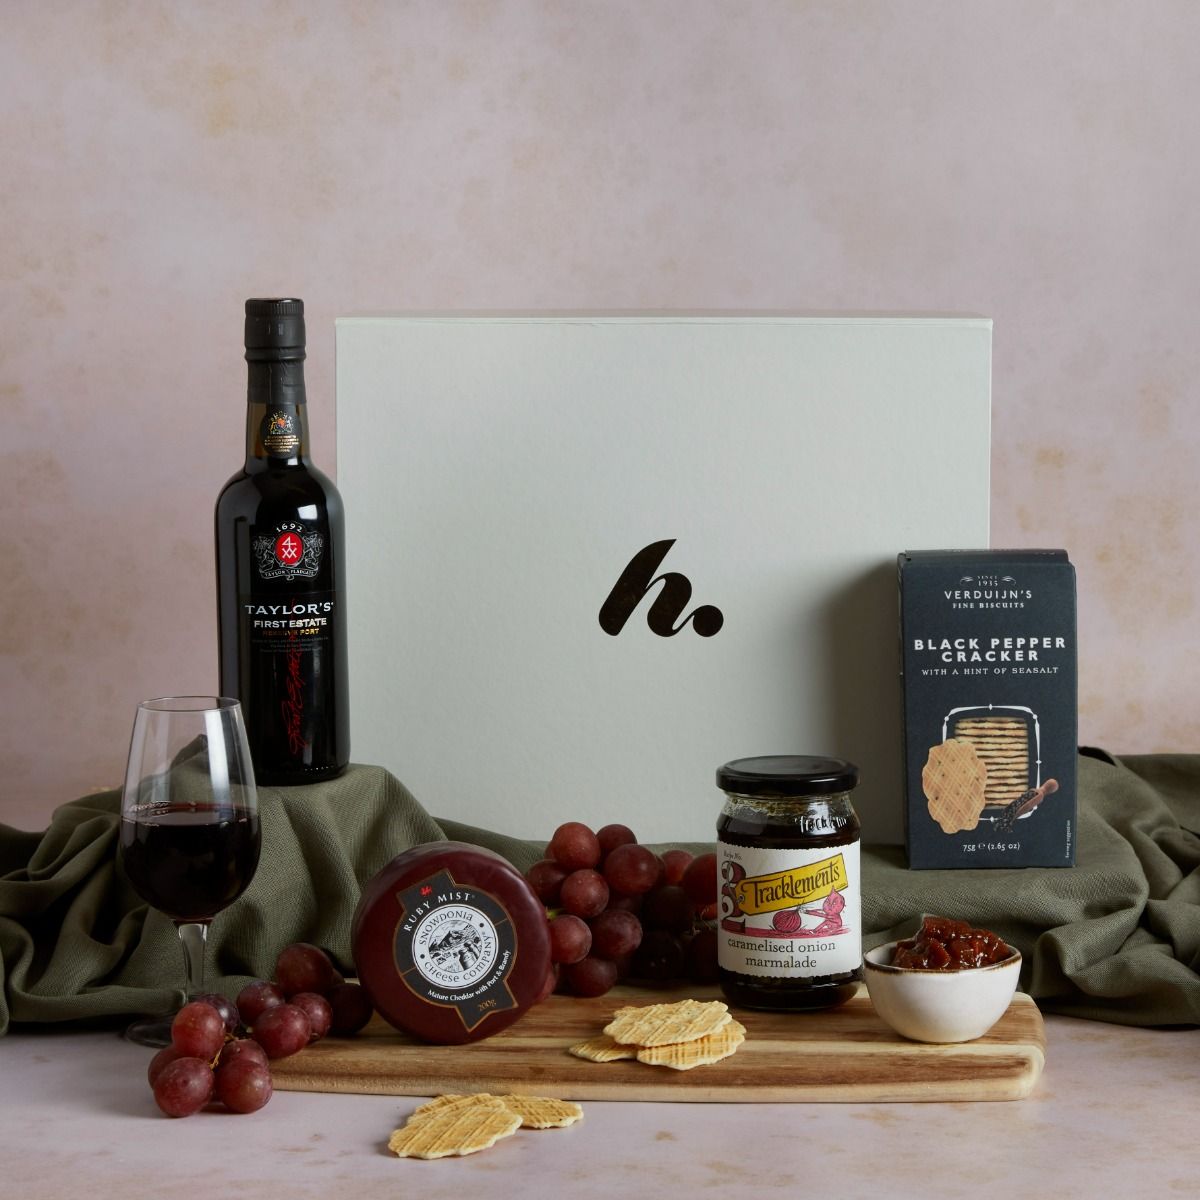 Premium port & cheese hamper with contents on display and signature gift box